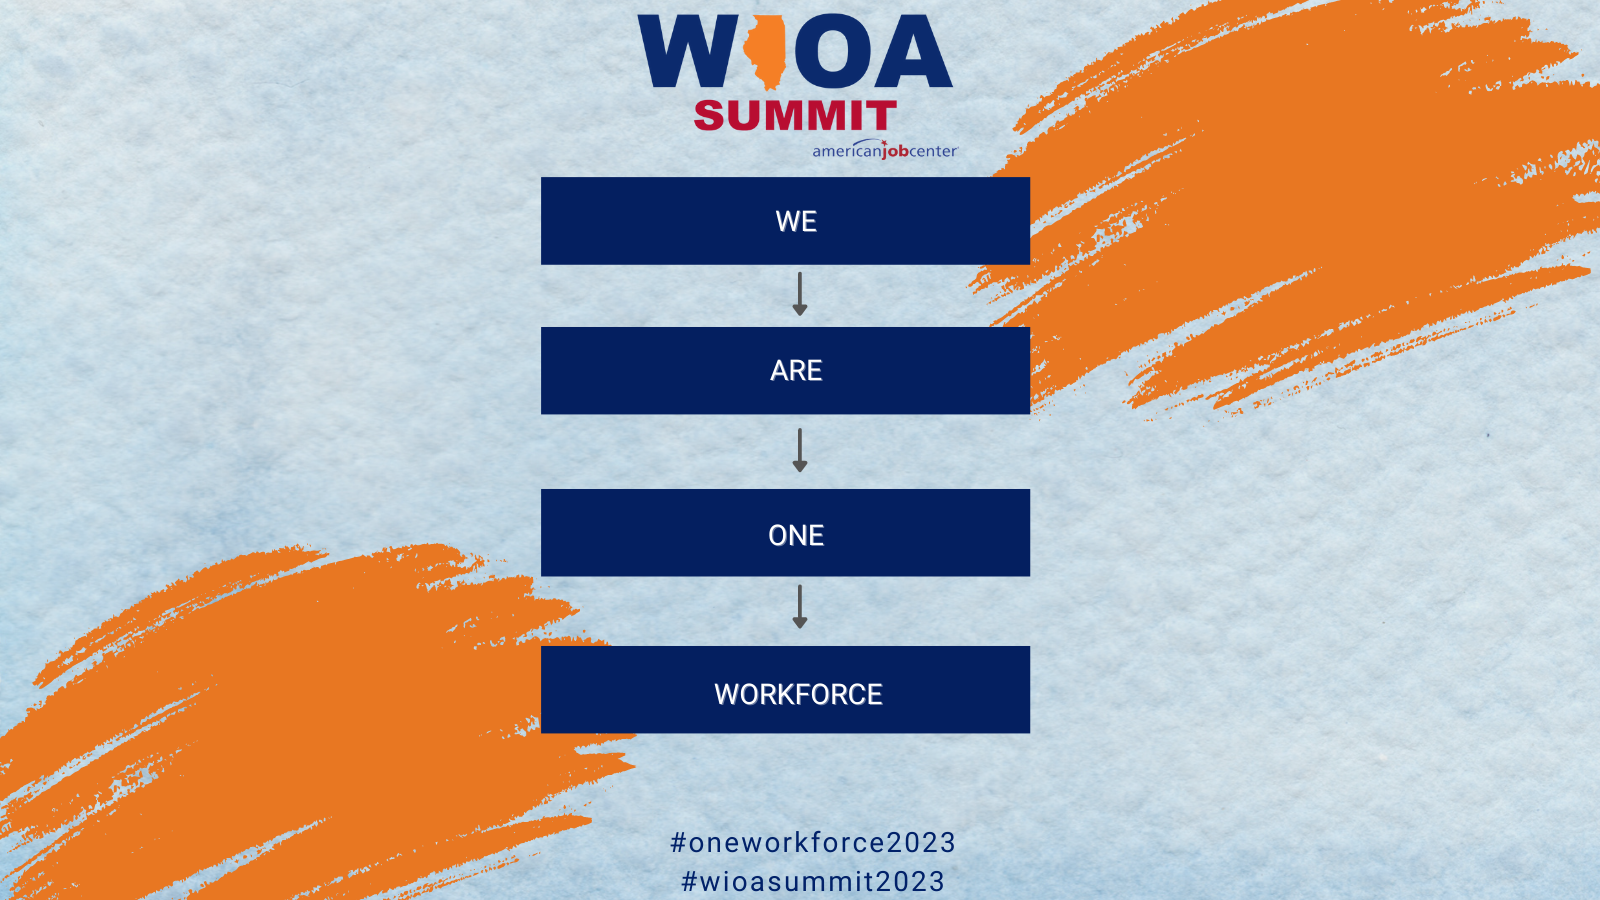 We are one Workforce